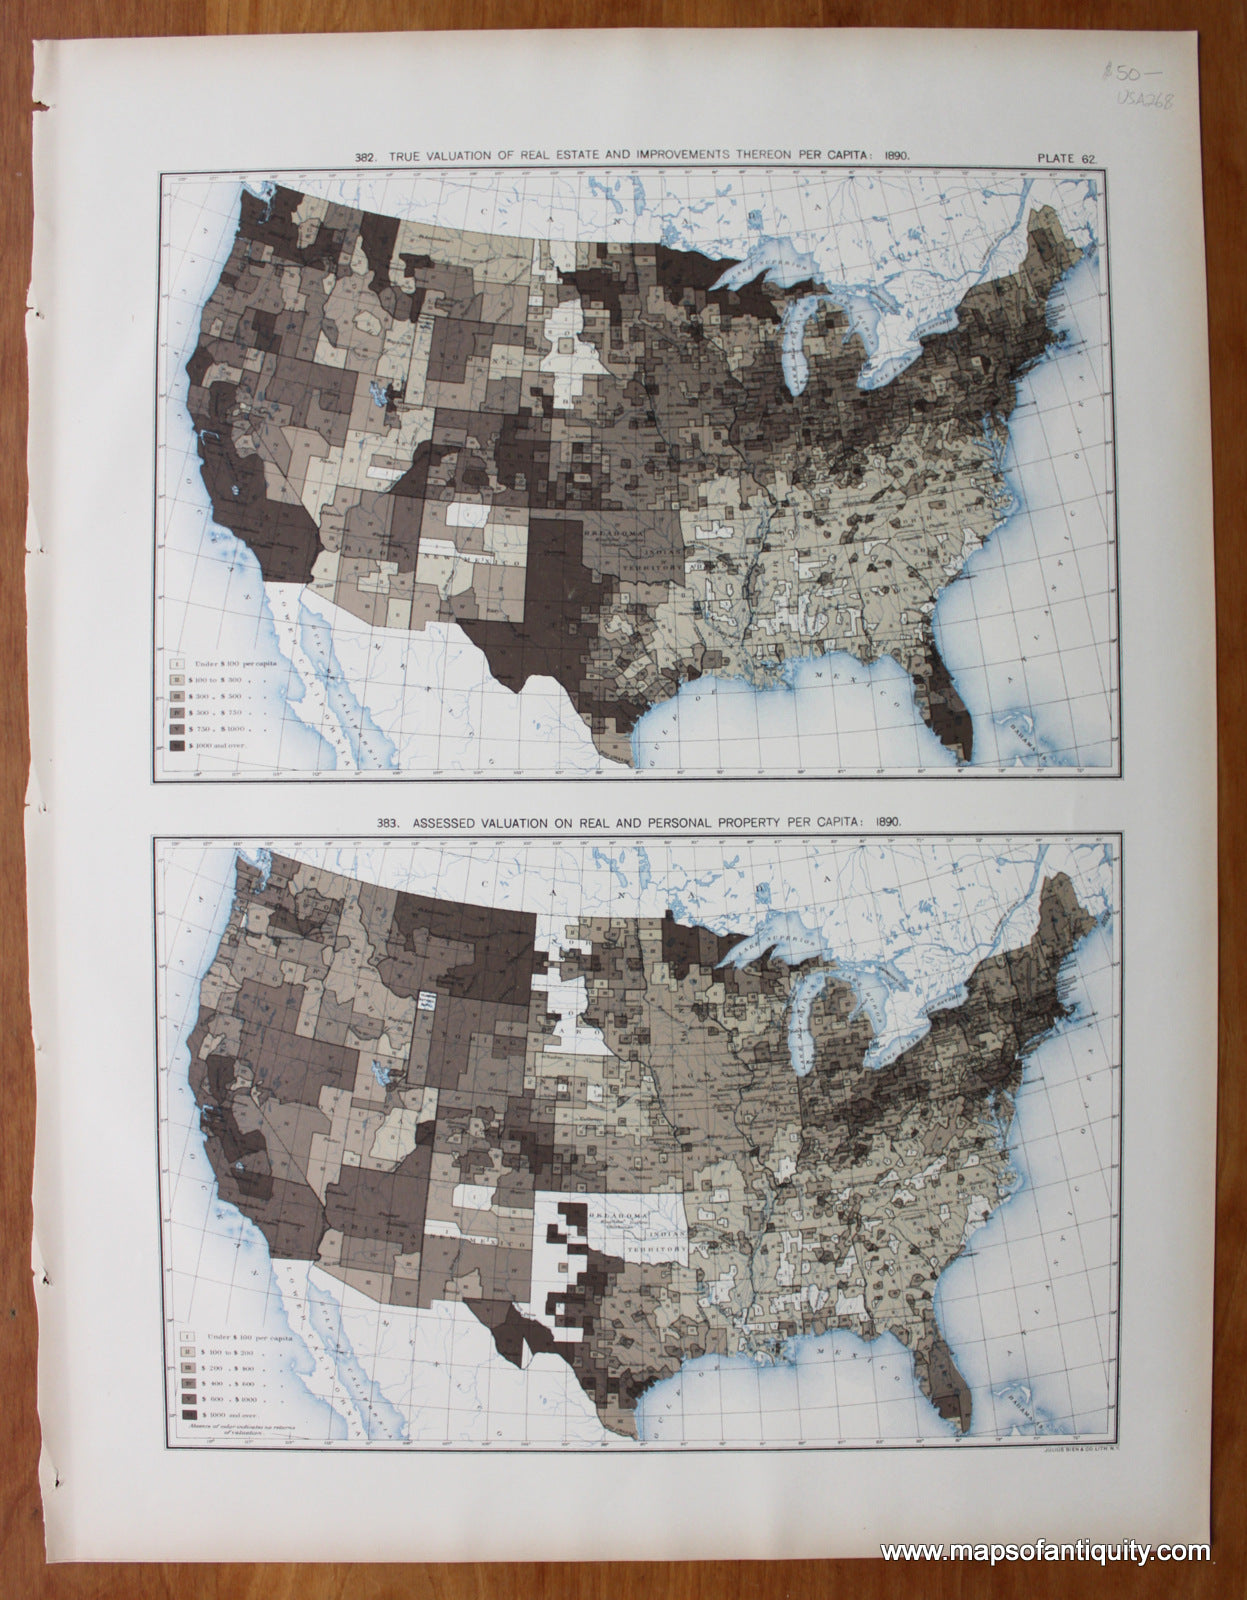 Antique-Printed-Color-Map-True-Valuation-of-Real-Estate-and-Improvements-Thereon-Per-Capita:-1890/-Assessed-Valuation-on-Real-and-Personal-Property-Per-Capita:-1890-United-States-United-States-General-1898-Gannett-Maps-Of-Antiquity